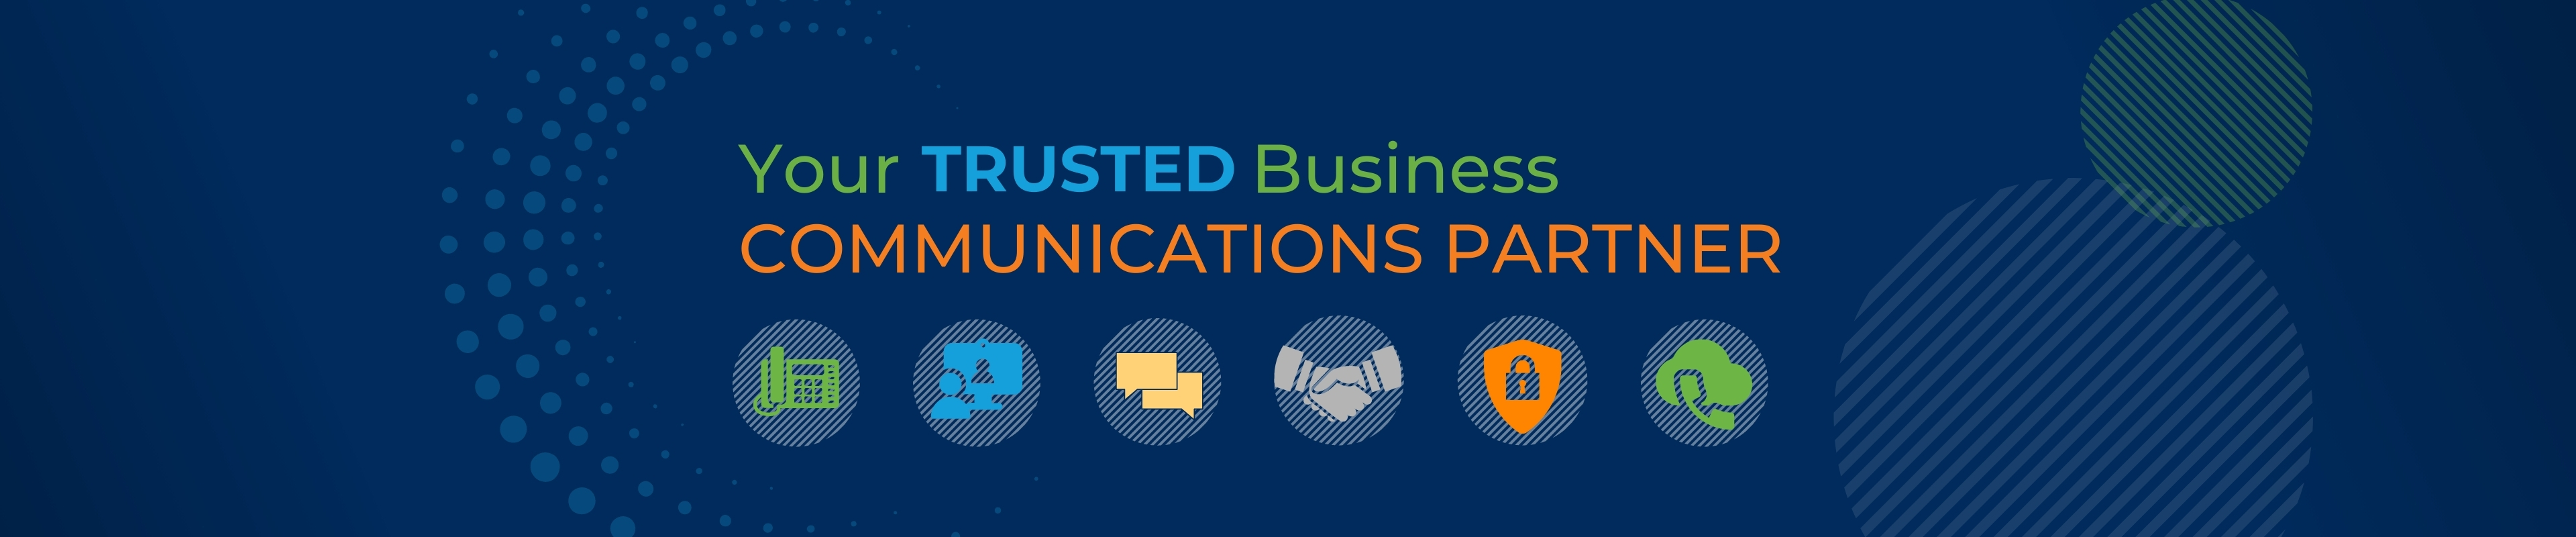 Your Trusted Business Communications Partner